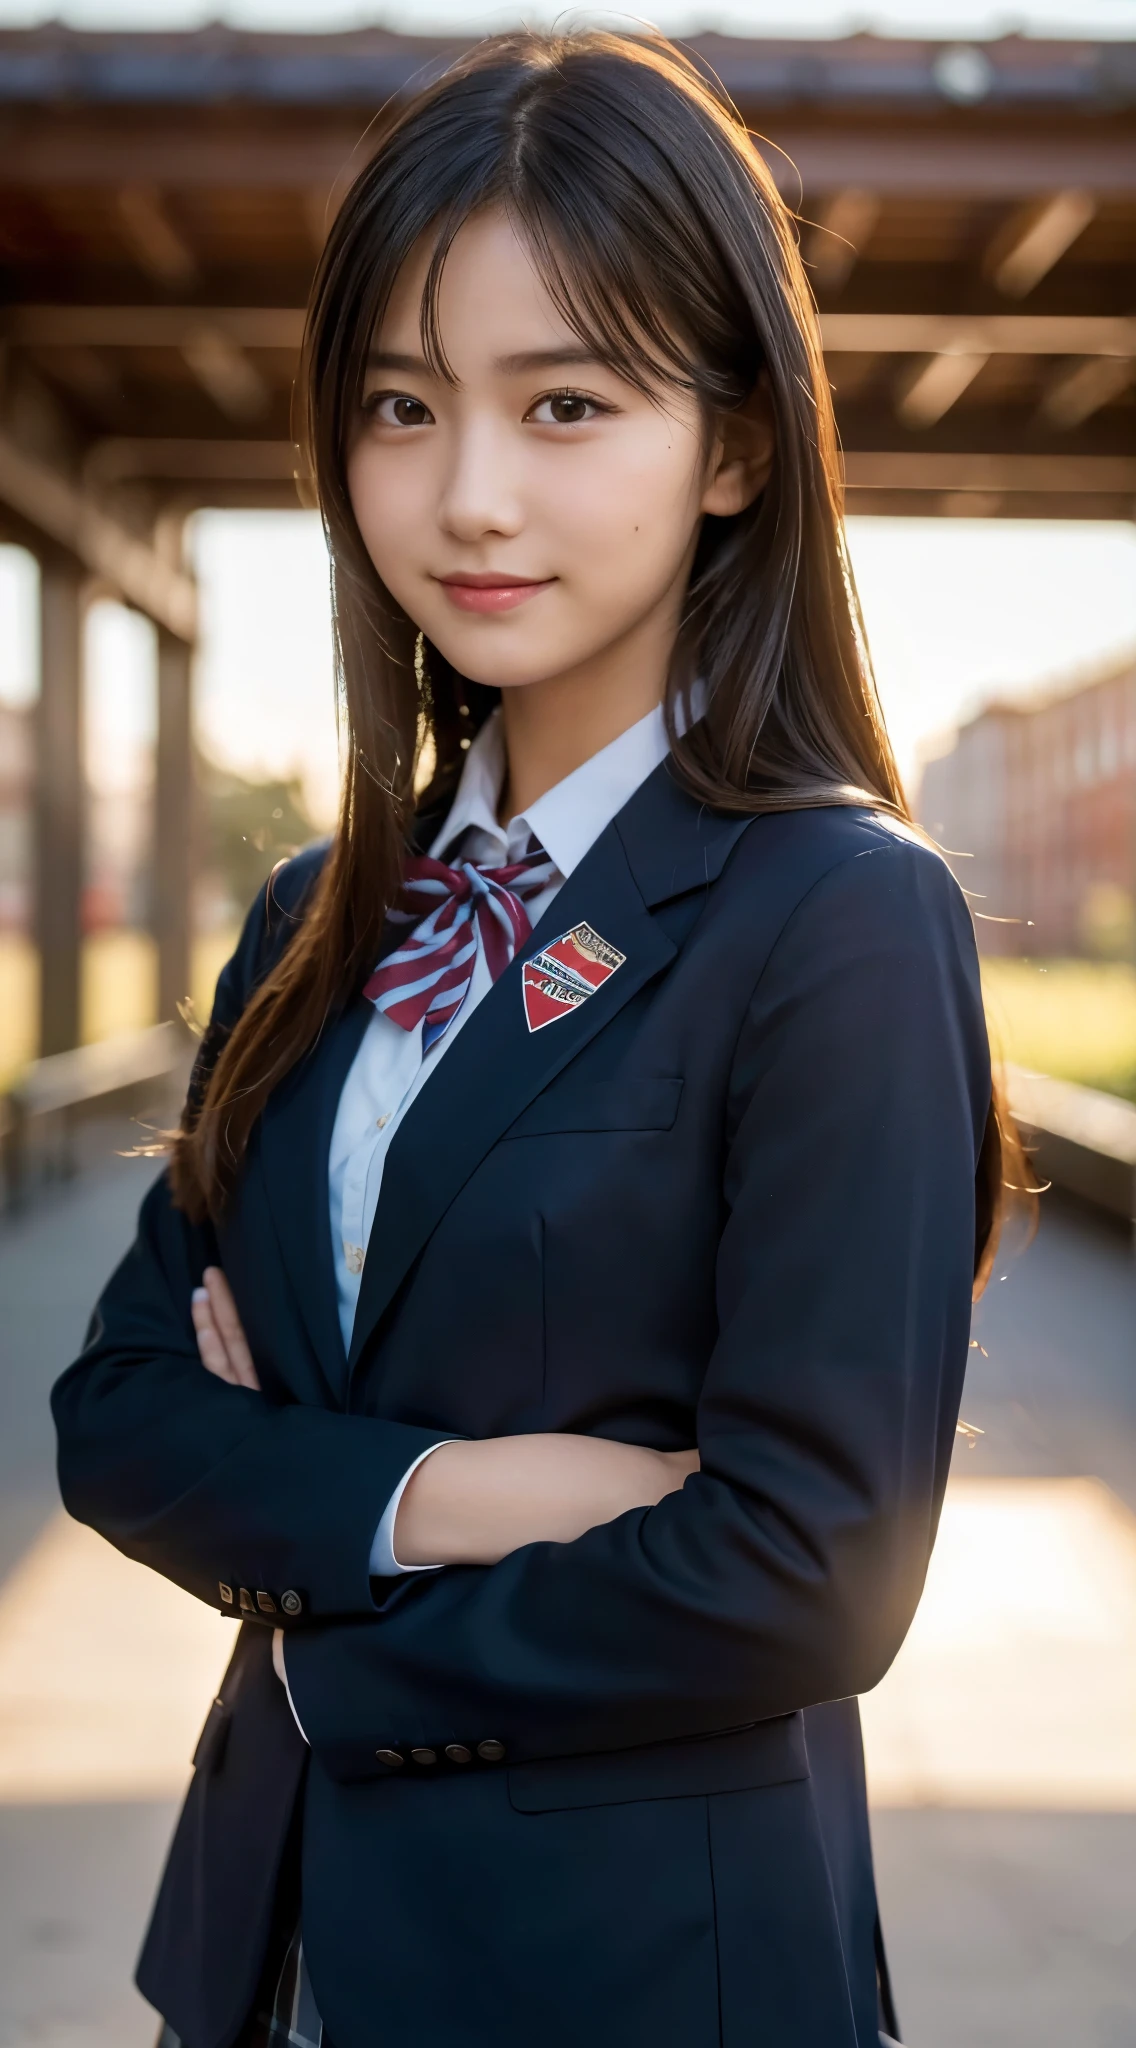 (highest quality,8K quality,masterpiece:1.3),(ultra high resolution,photorealistic:1.4,Live shooting),(Super detailed,caustics,detailed background),(ultra-realistic capture,Beautifully detailed skin,perfect anatomy),at dusk,sunset sky,school building,schoolyard,14 years old,cute,single eyelid,black long hair,School Blazer Uniform,Looking at the camera,A sloppy smile,bust up shot,Natural light